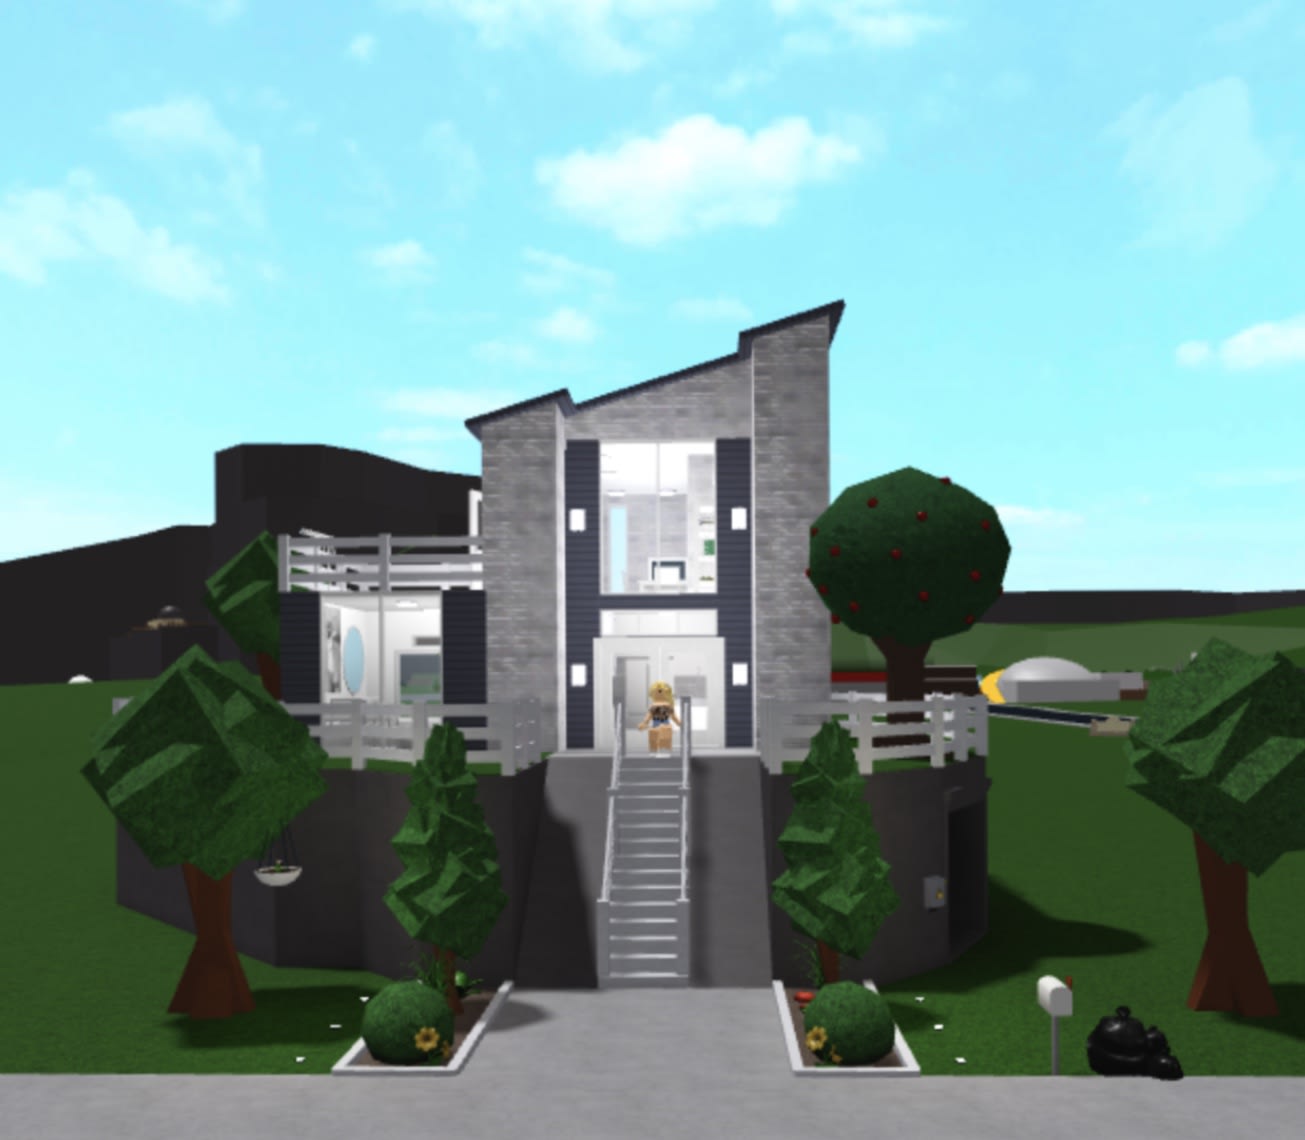 Build You Any House You Want On Welcome To Bloxburg By Lascat57 Fiverr - roblox bloxburg ayzria